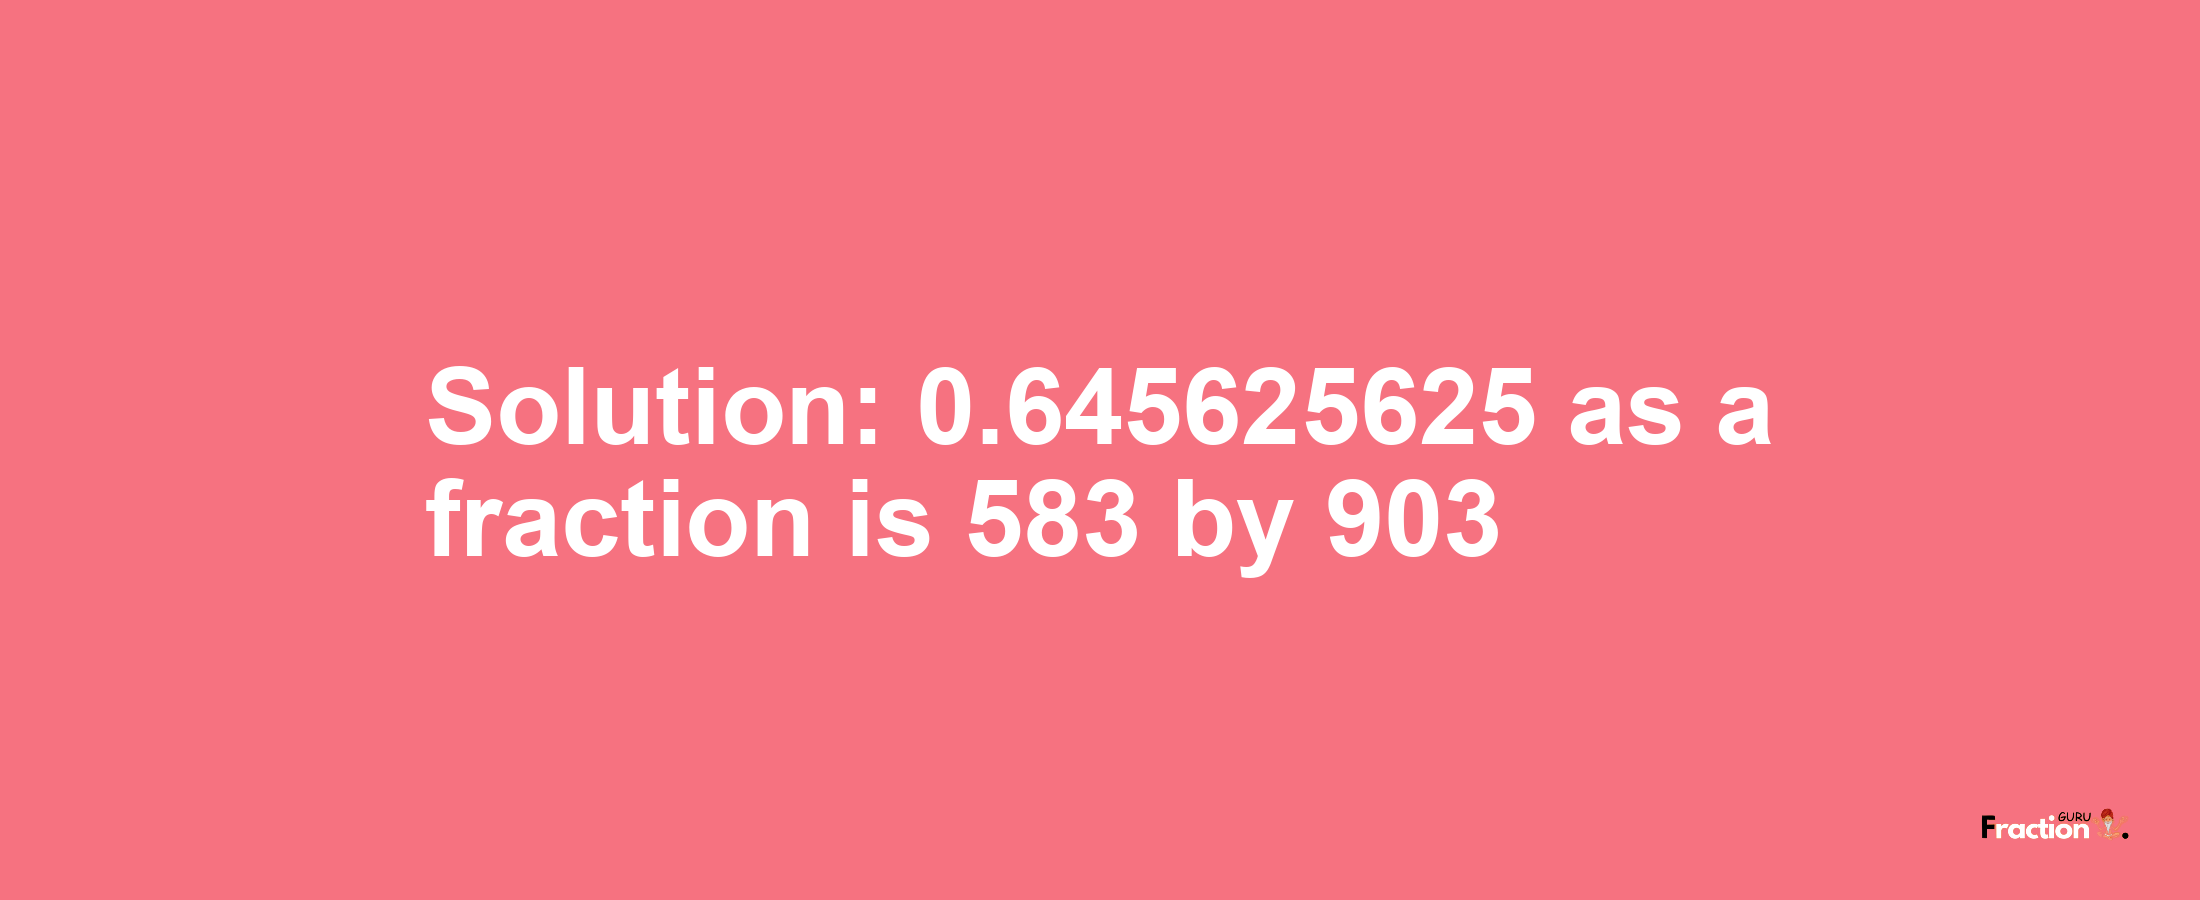 Solution:0.645625625 as a fraction is 583/903